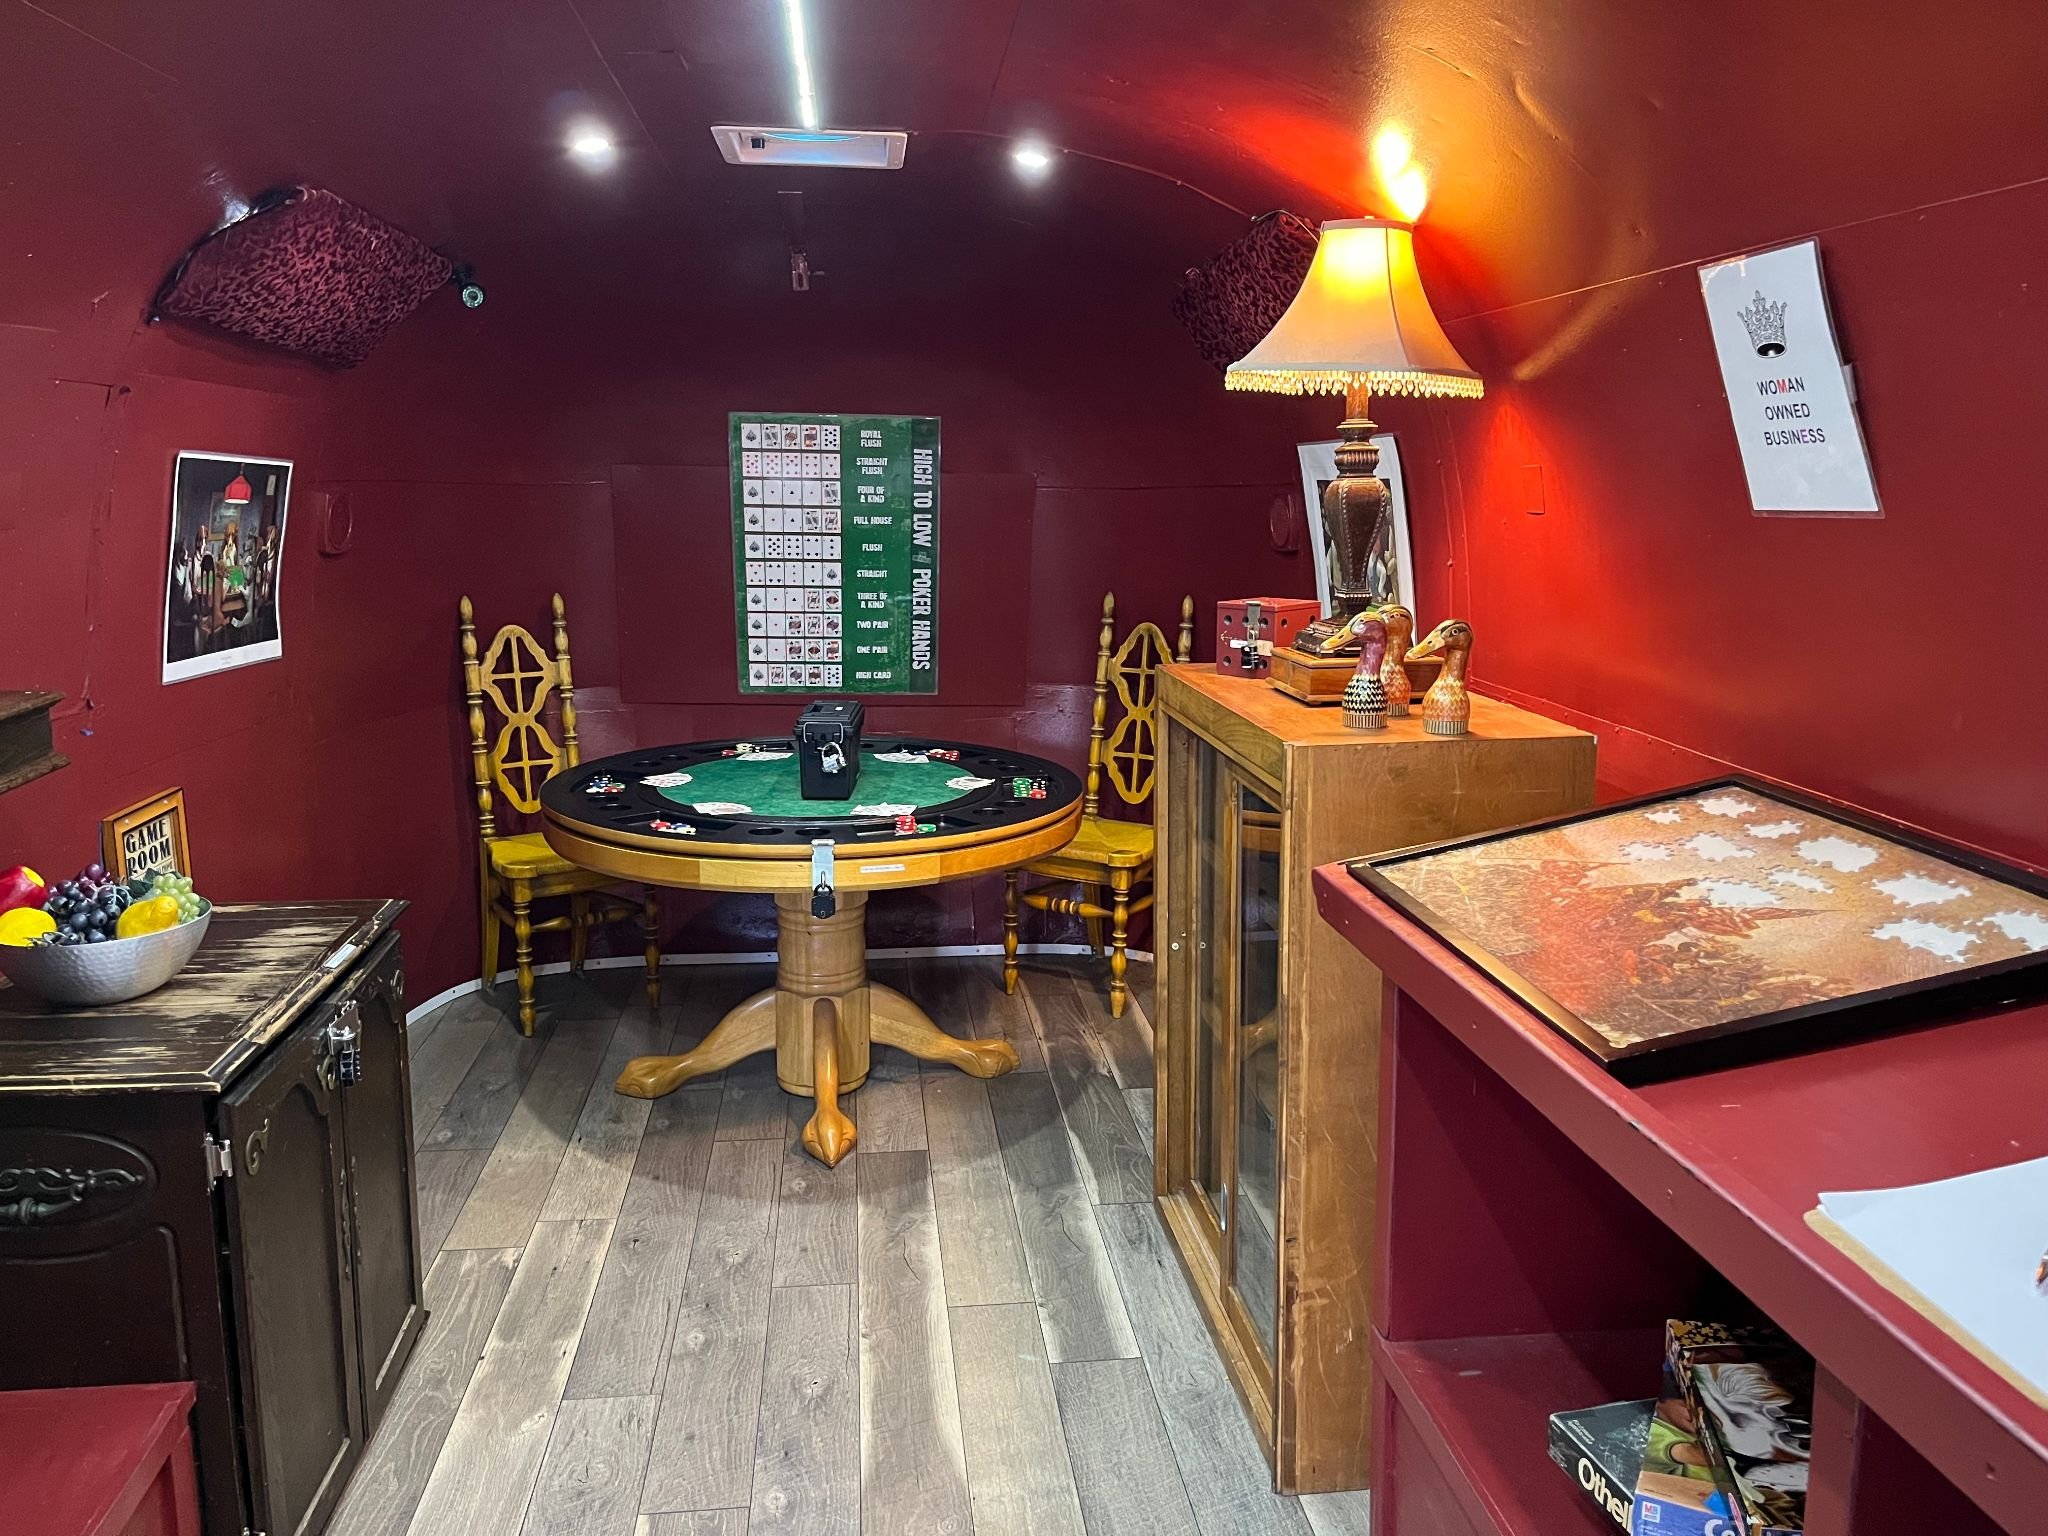  The Ultimate Escape Room is mafia-themed, set in a mobile gambling hall. – Photo by Elizabeth Basile 